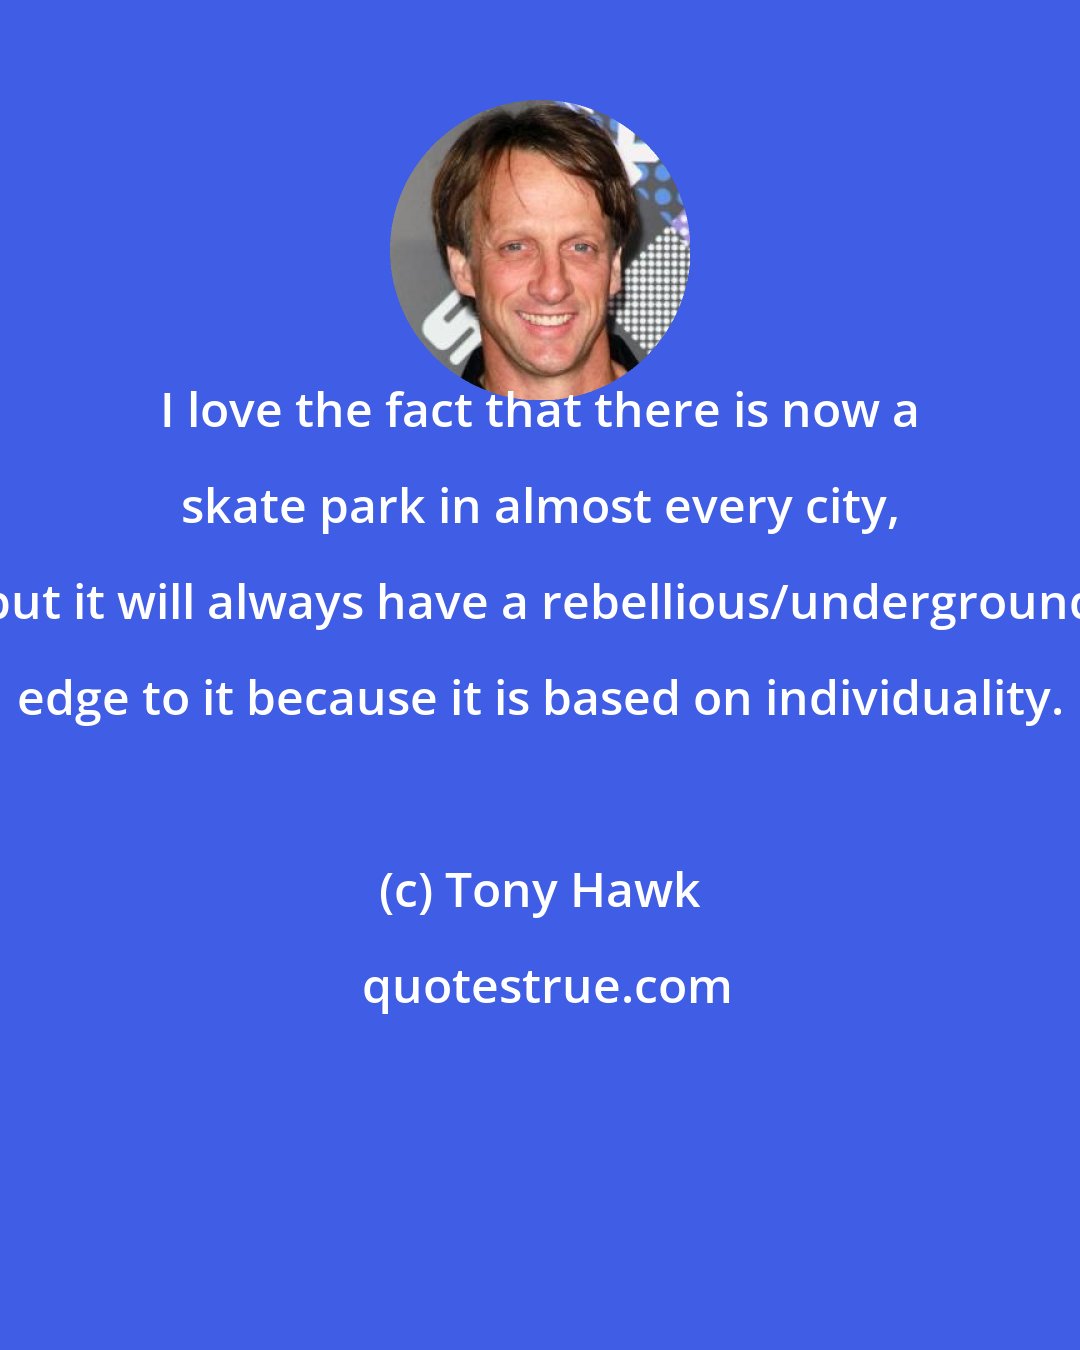 Tony Hawk: I love the fact that there is now a skate park in almost every city, but it will always have a rebellious/underground edge to it because it is based on individuality.